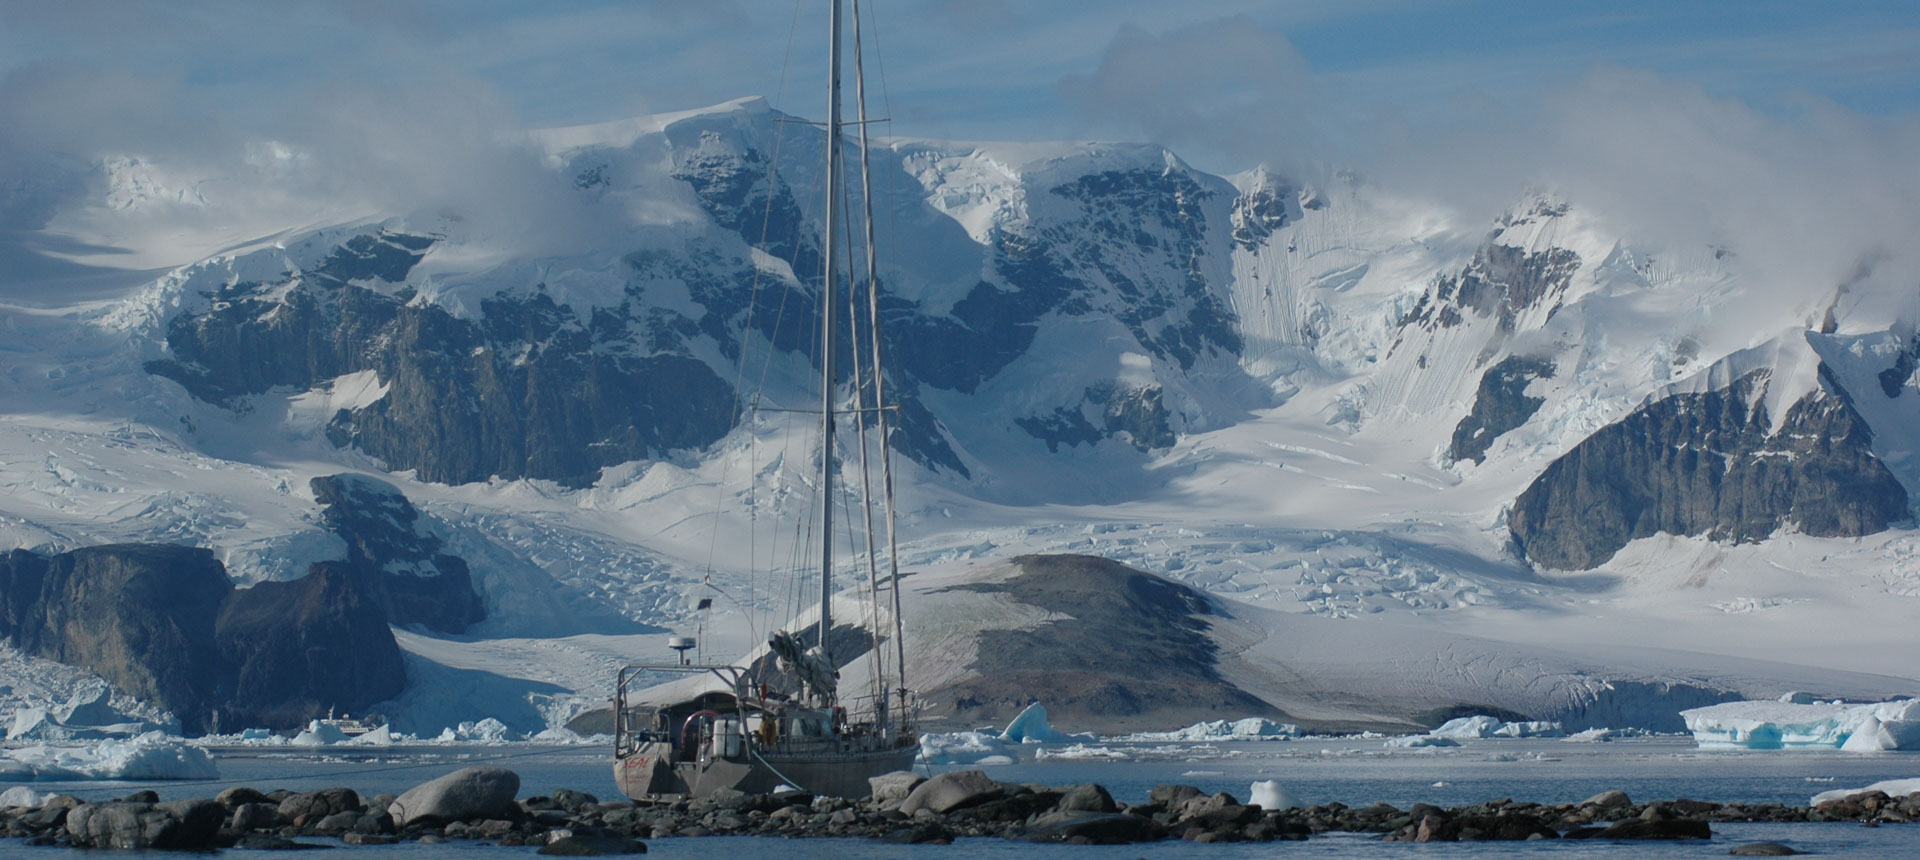 Expedition Yacht Seal sailing in Antarctica